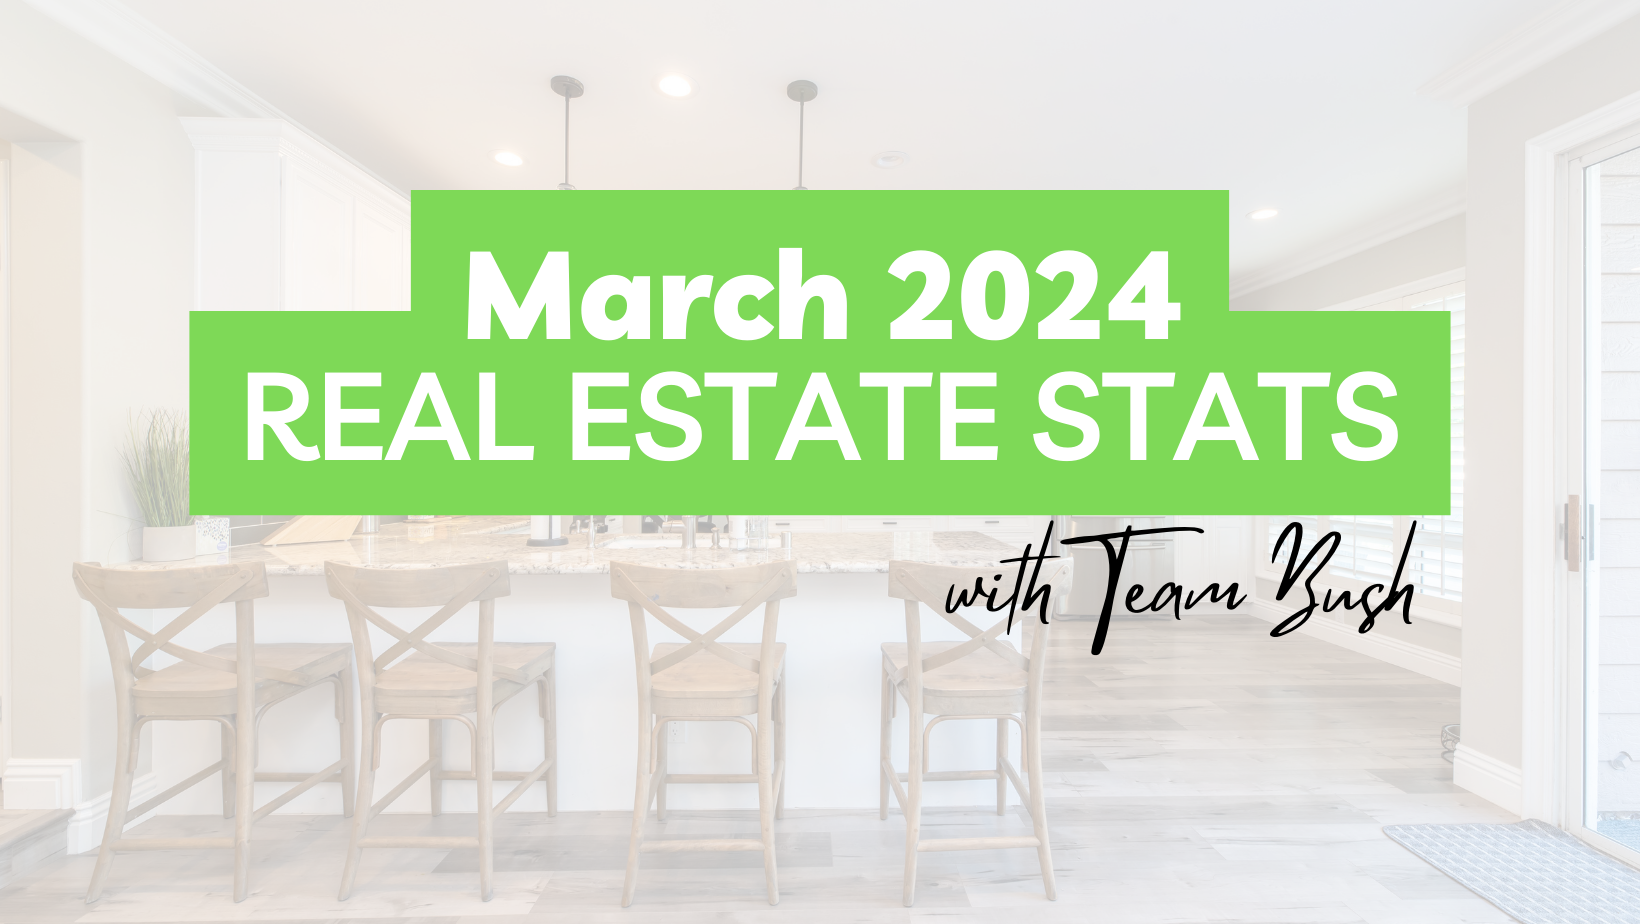 March 2024 Real Estate Stats by Team Bush